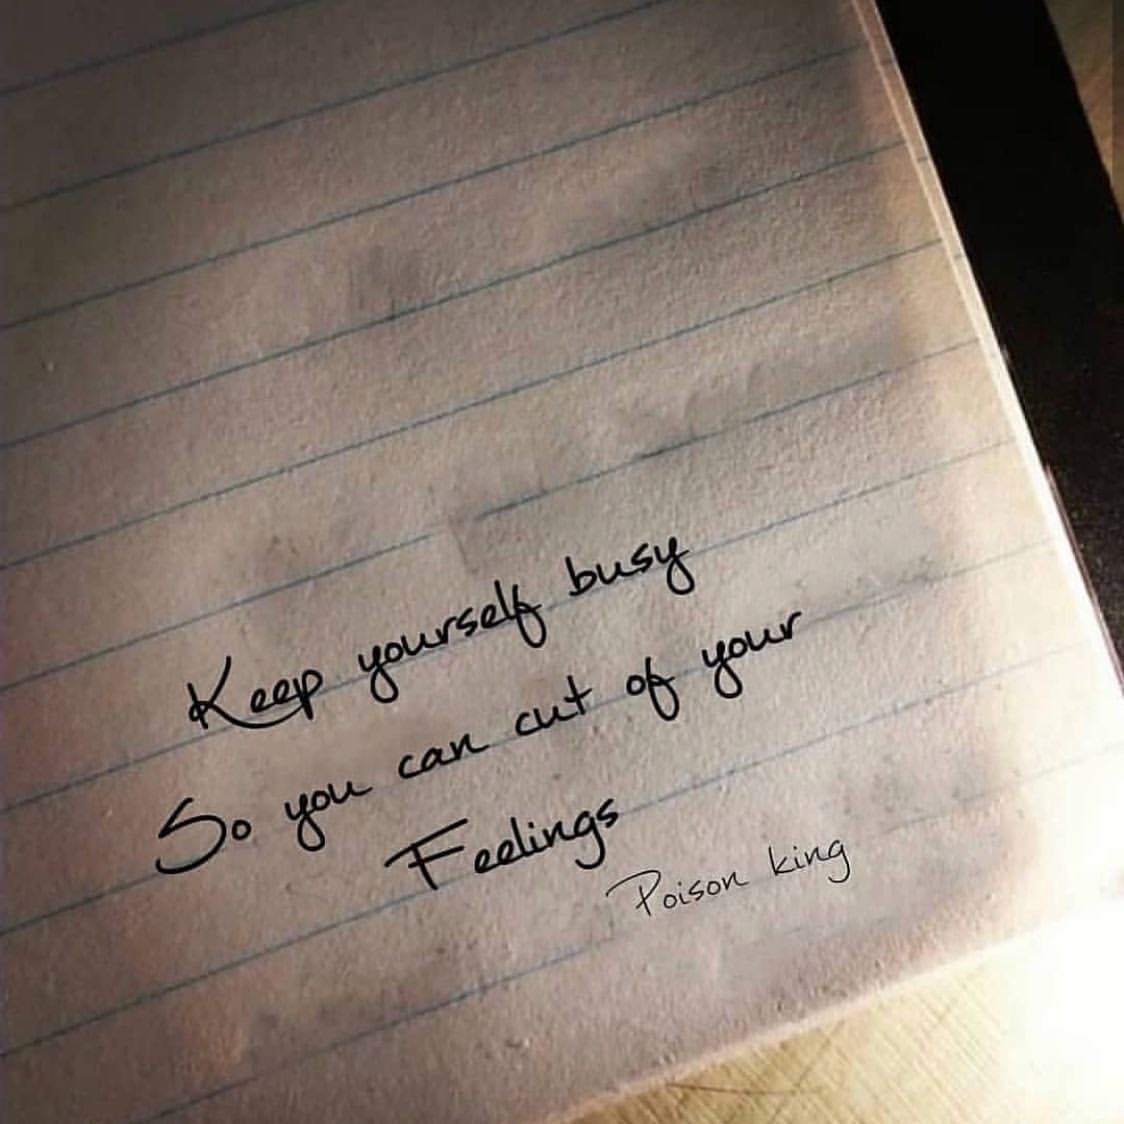 Keep yourself busy. So you can cut of your feelings.